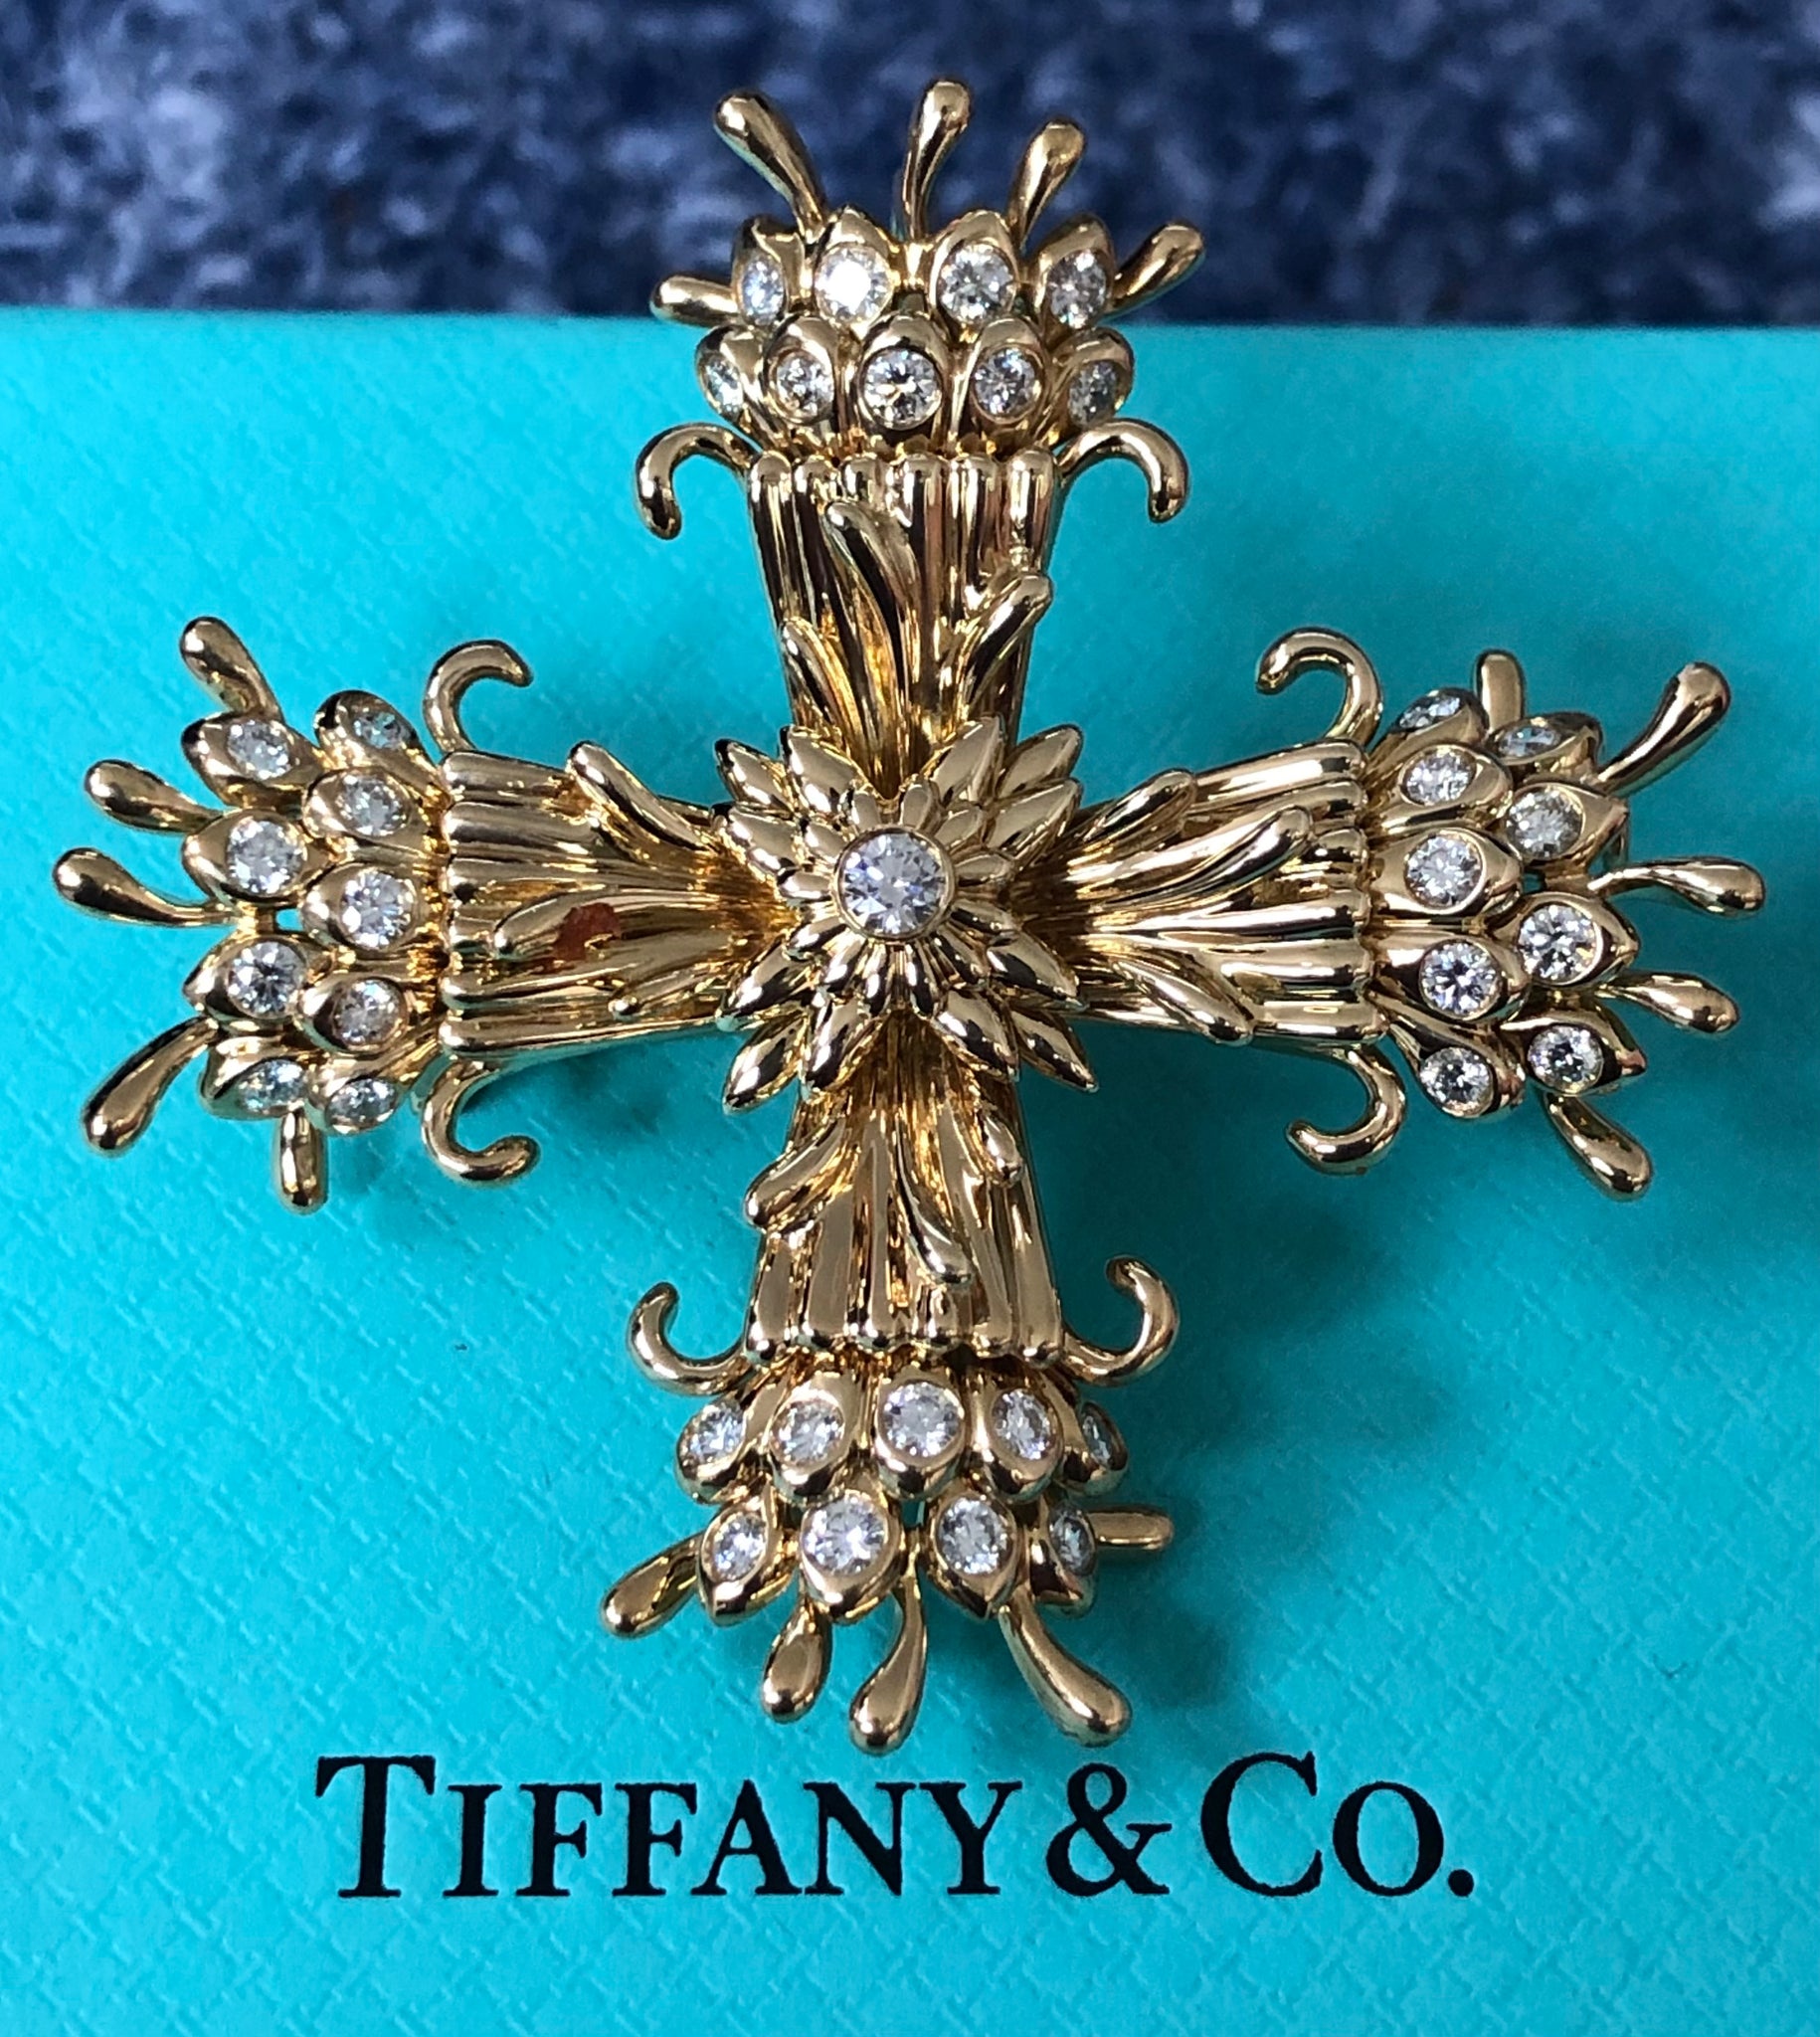 Tiffany & Co. 1.18tcw Diamond & 18ct Solid Gold Maltese Cross Rcpts/Boxes $32000